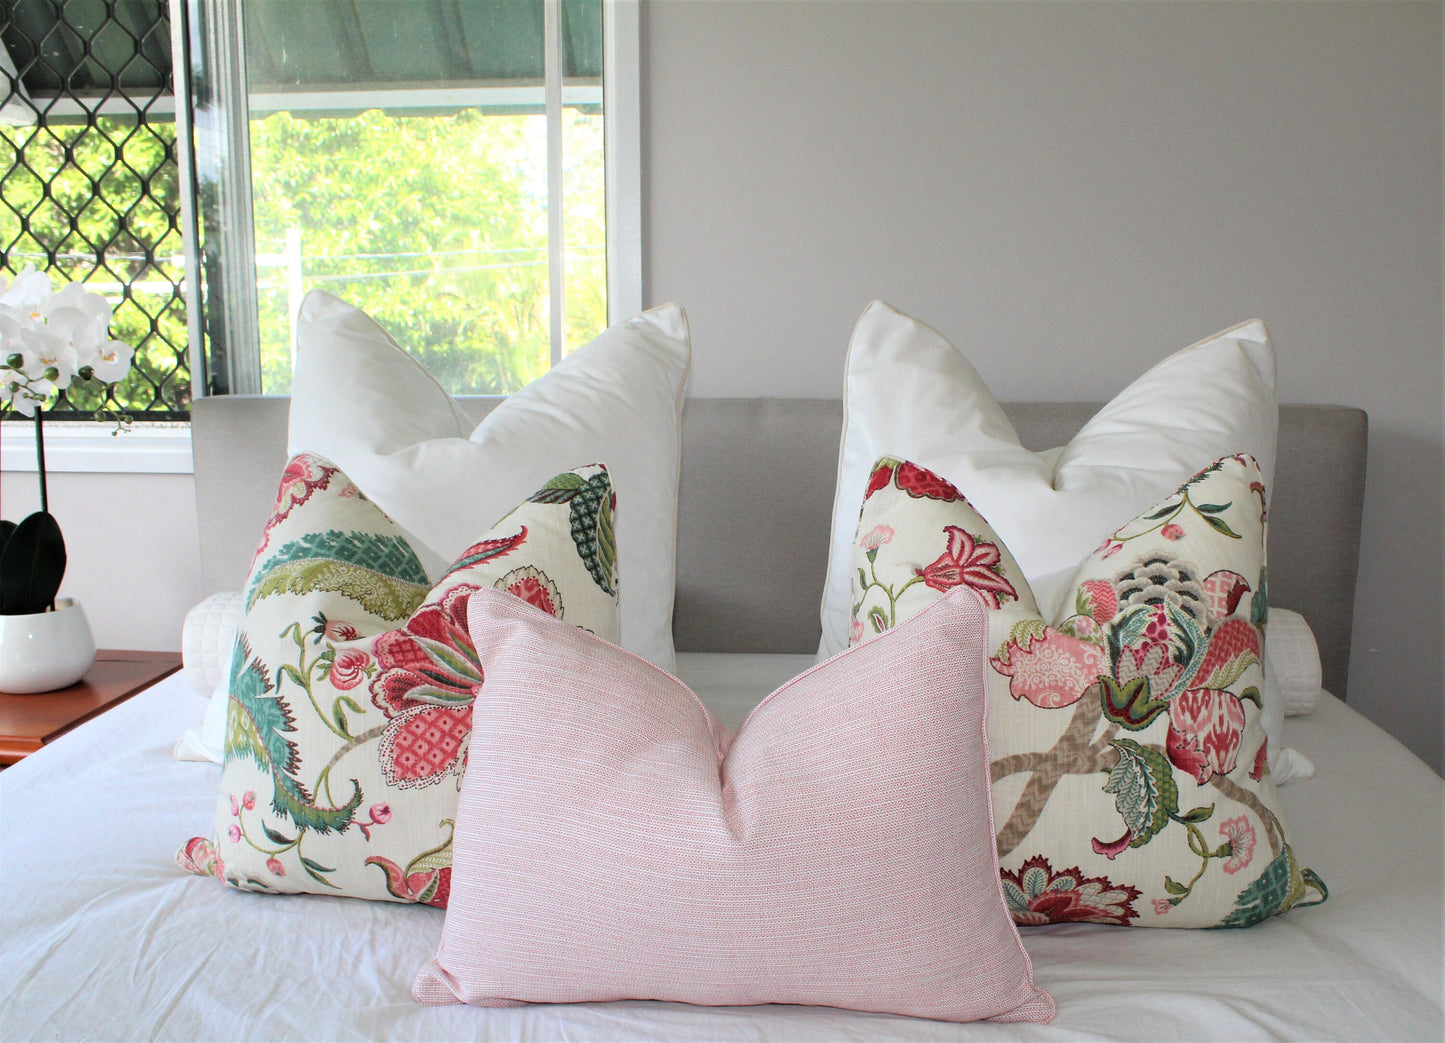 Large Floral Hampton style Cushion covers